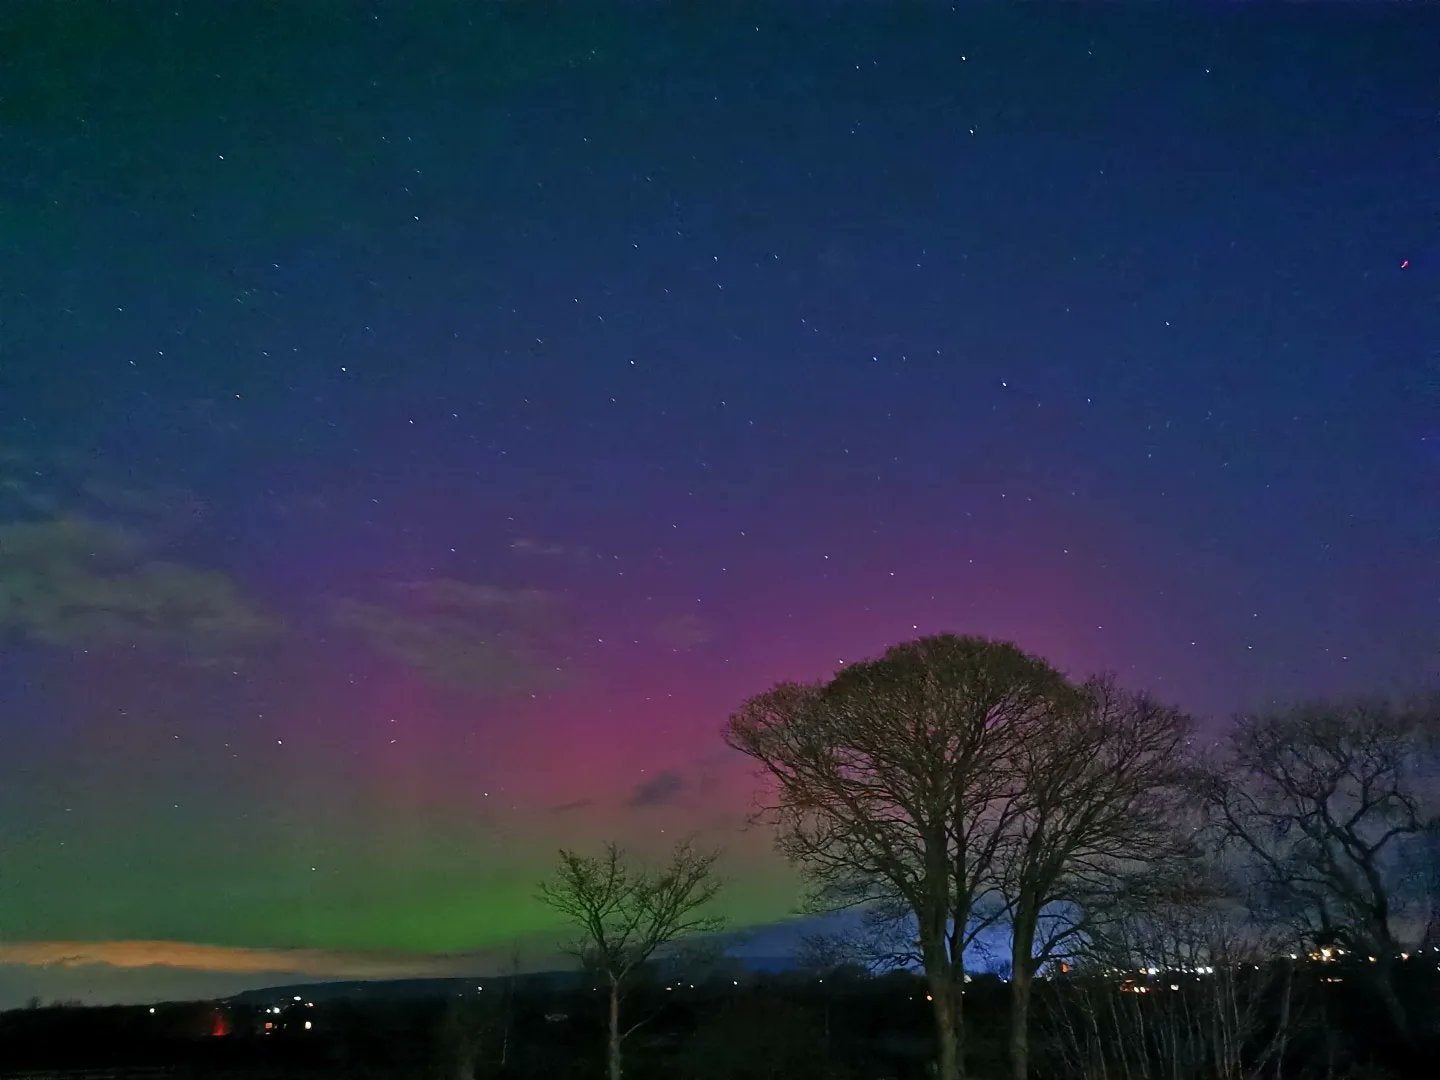 The aurora borealis, also known as the northern lights, over Grimsargh Wetlands in Lancashire